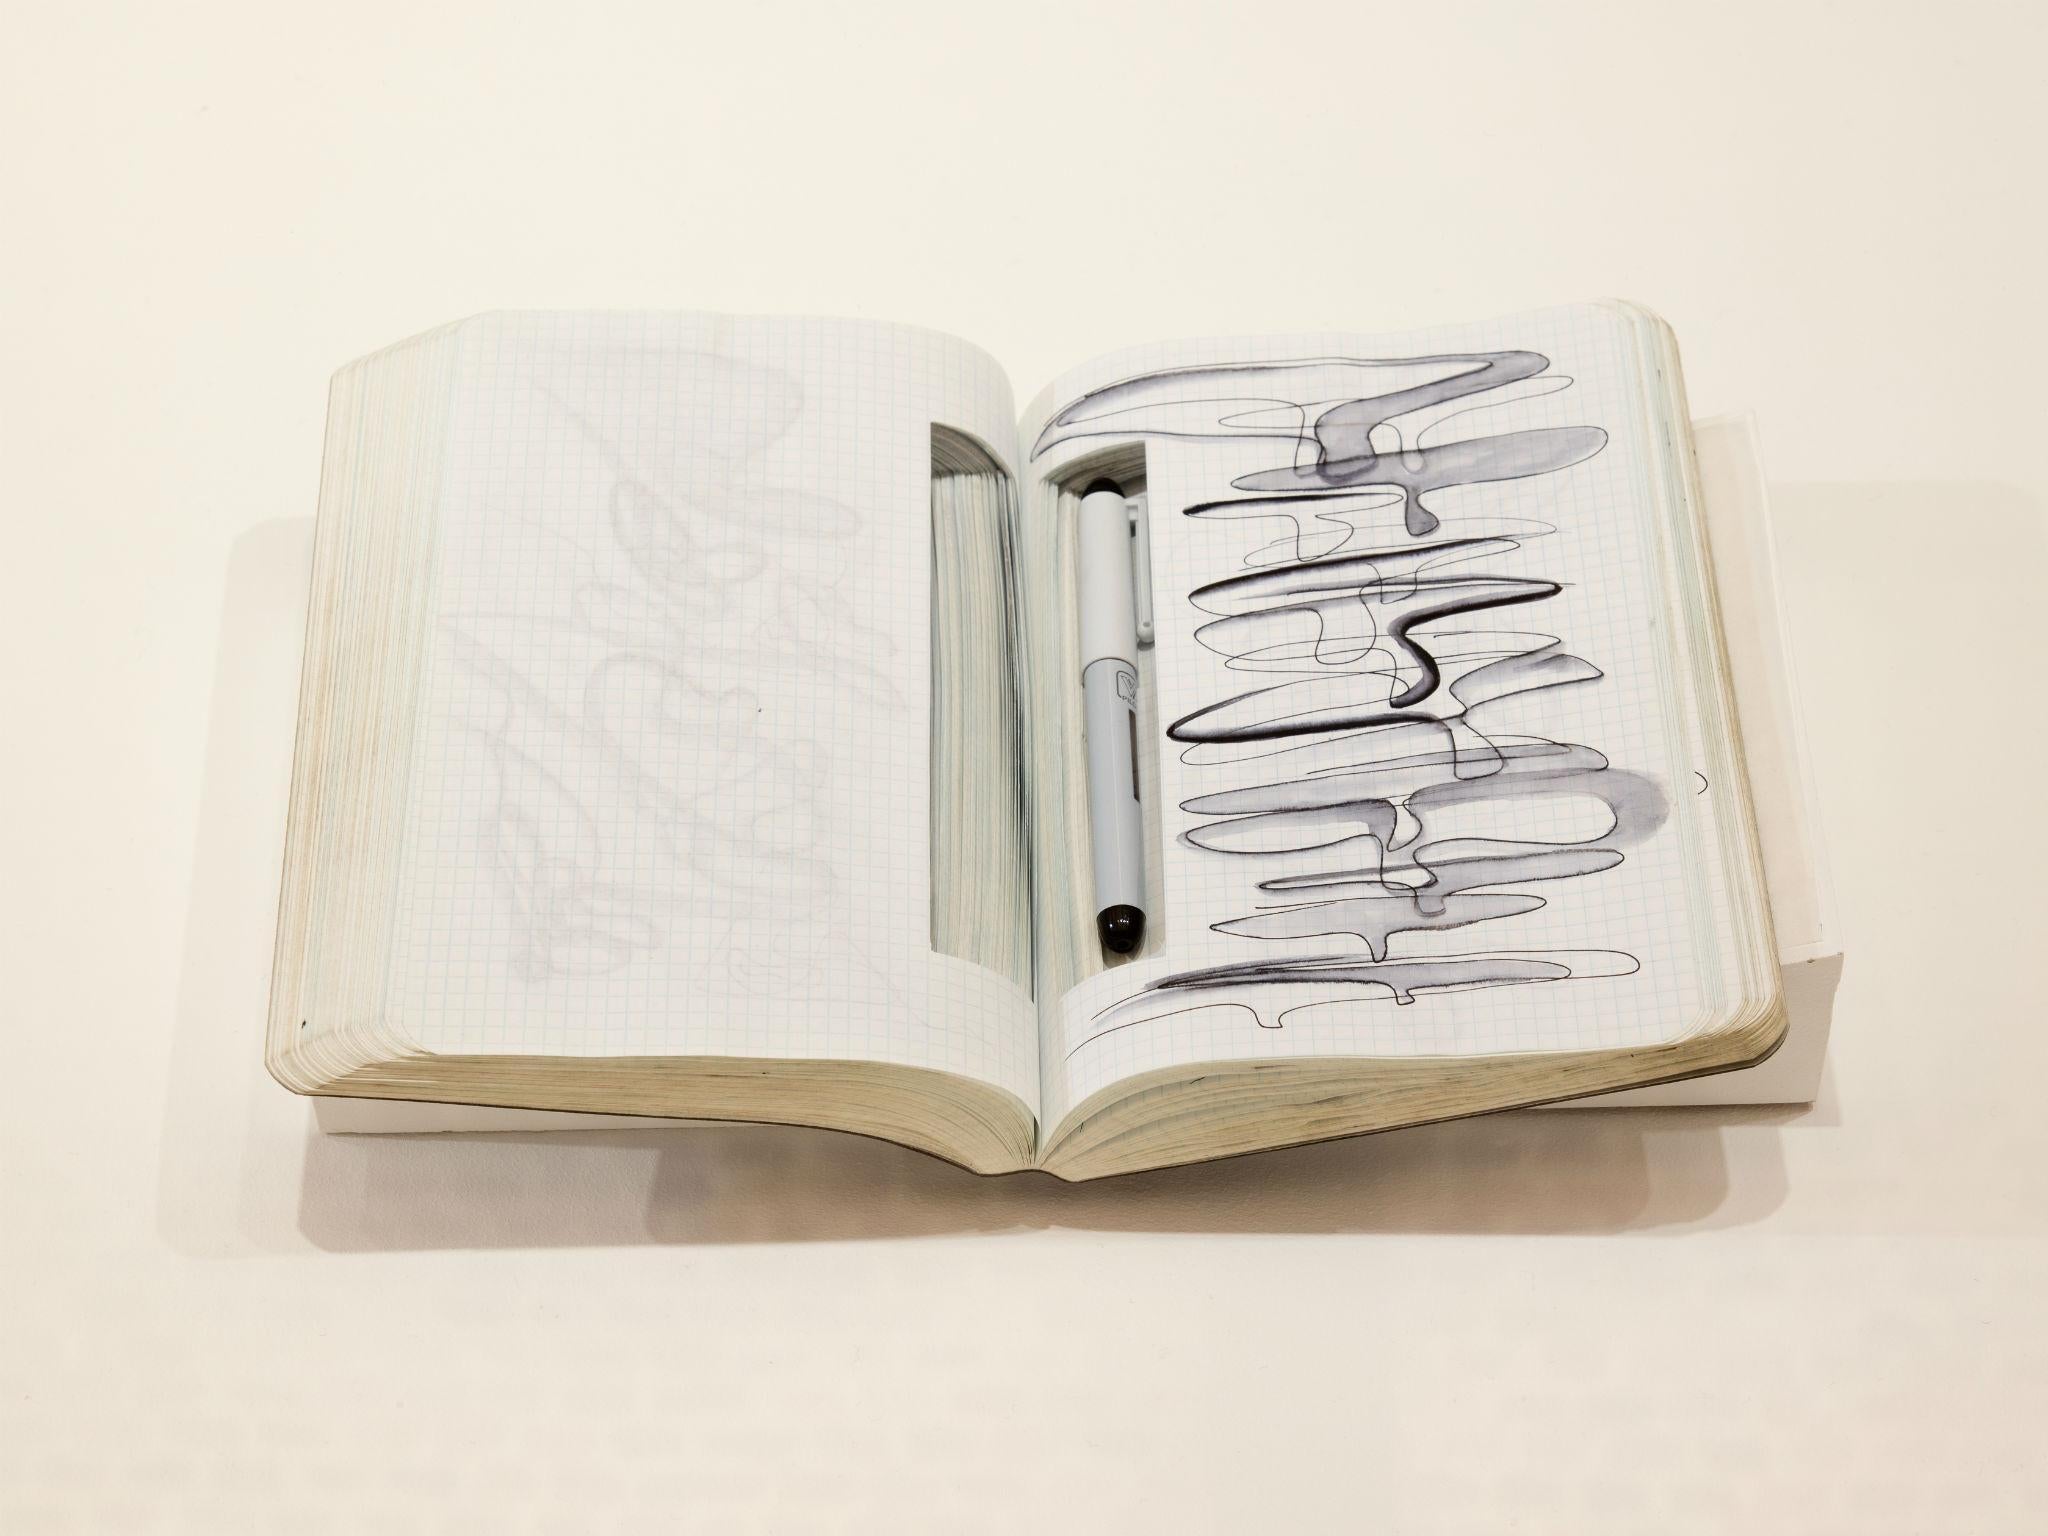 One of Zara Hadid’s notebooks, exhibited at the Serpentine Gallery in Zara Hadid: Early Paintings and Drawings